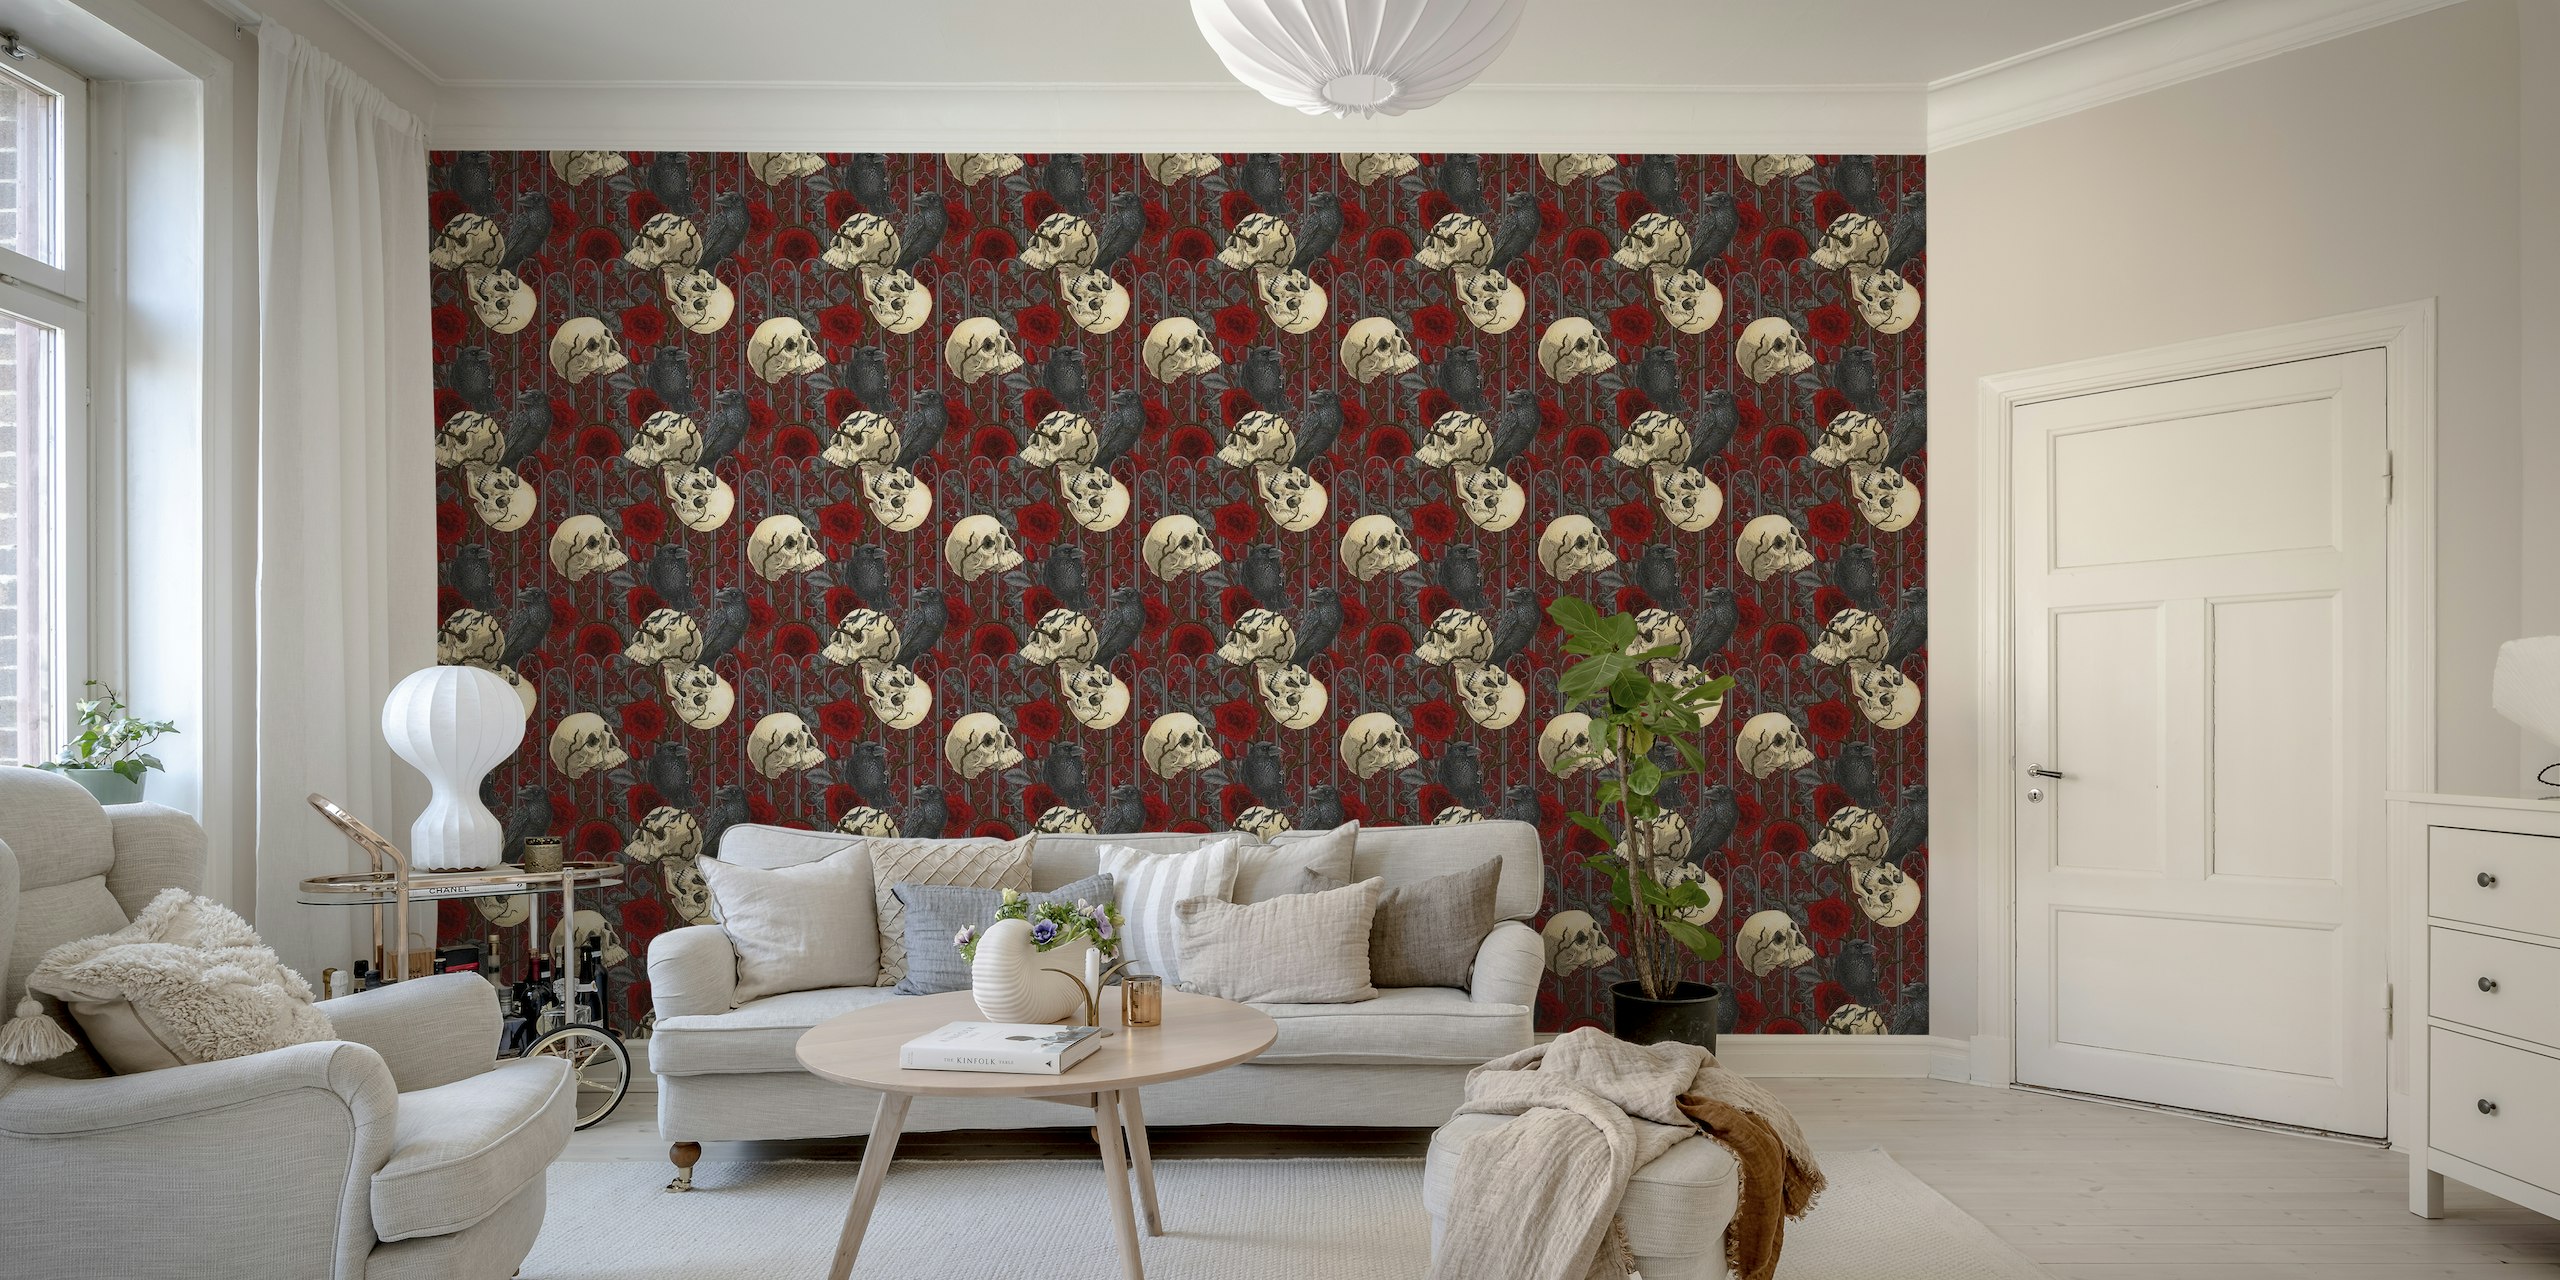 Raven's secret. Dark and moody gothic illustration with human skulls and red roses 5 wallpaper